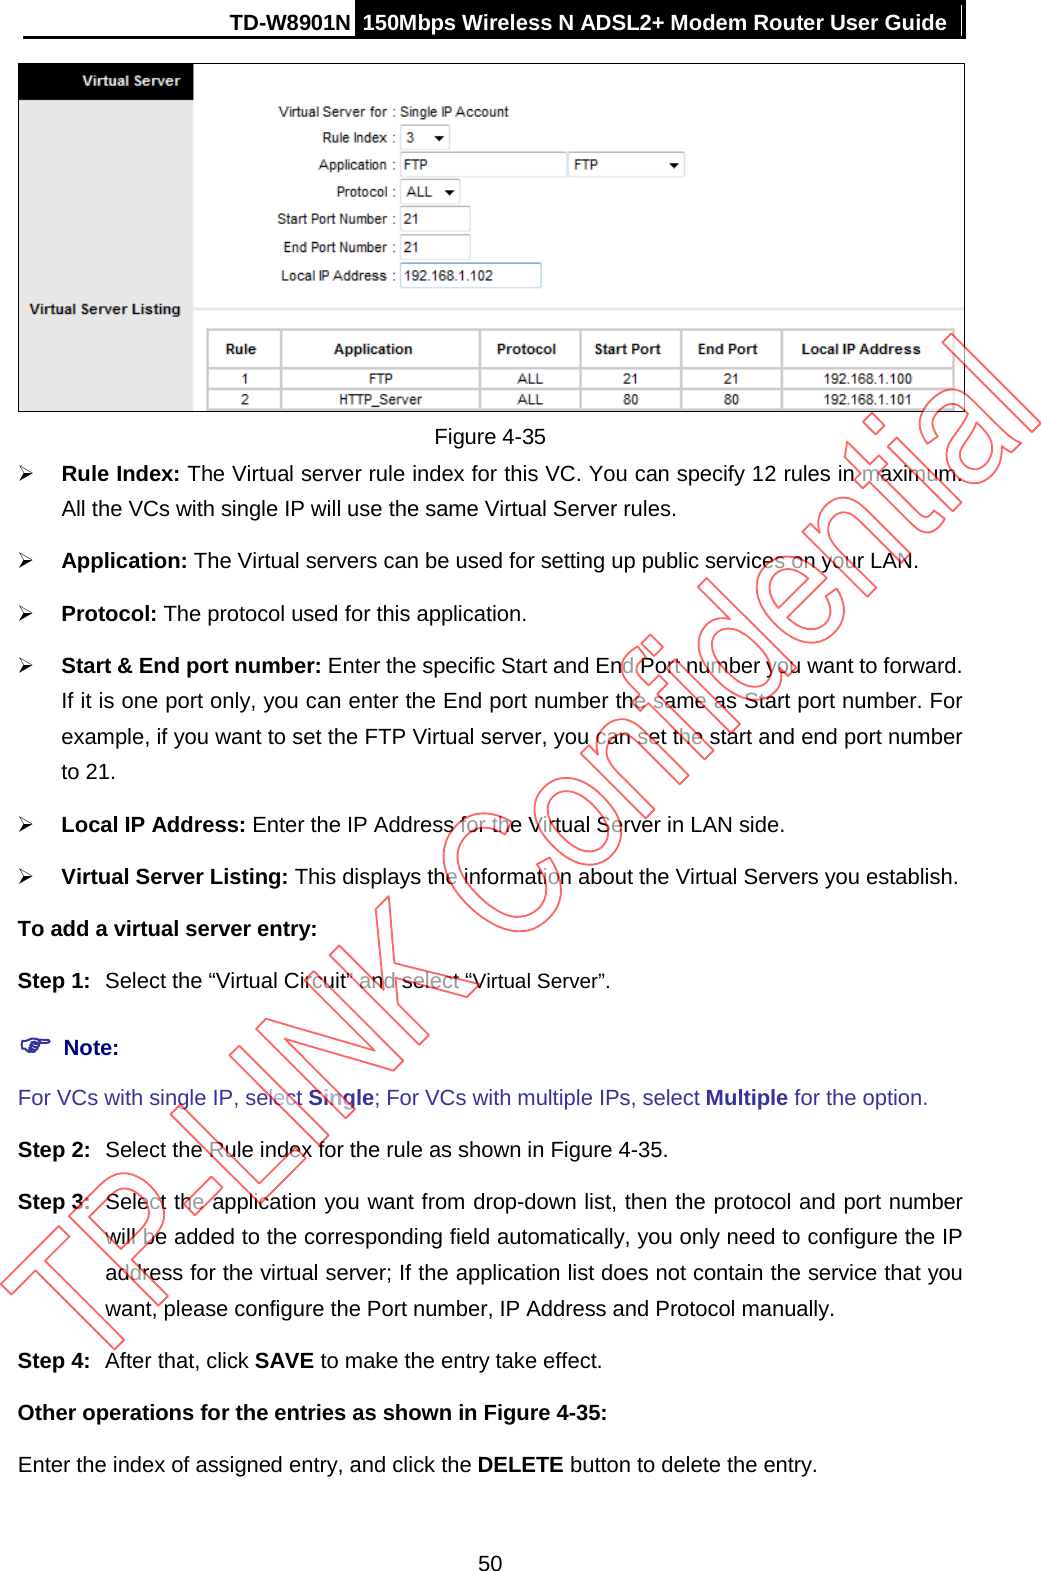 TD-W8901N 150Mbps Wireless N ADSL2+ Modem Router User Guide   Figure 4-35  Rule Index: The Virtual server rule index for this VC. You can specify 12 rules in maximum. All the VCs with single IP will use the same Virtual Server rules.  Application: The Virtual servers can be used for setting up public services on your LAN.  Protocol: The protocol used for this application.  Start &amp; End port number: Enter the specific Start and End Port number you want to forward. If it is one port only, you can enter the End port number the same as Start port number. For example, if you want to set the FTP Virtual server, you can set the start and end port number to 21.  Local IP Address: Enter the IP Address for the Virtual Server in LAN side.  Virtual Server Listing: This displays the information about the Virtual Servers you establish. To add a virtual server entry:   Step 1: Select the “Virtual Circuit” and select “Virtual Server”.  Note: For VCs with single IP, select Single; For VCs with multiple IPs, select Multiple for the option. Step 2: Select the Rule index for the rule as shown in Figure 4-35. Step 3: Select the application you want from drop-down list, then the protocol and port number will be added to the corresponding field automatically, you only need to configure the IP address for the virtual server; If the application list does not contain the service that you want, please configure the Port number, IP Address and Protocol manually. Step 4: After that, click SAVE to make the entry take effect. Other operations for the entries as shown in Figure 4-35: Enter the index of assigned entry, and click the DELETE button to delete the entry. 50 